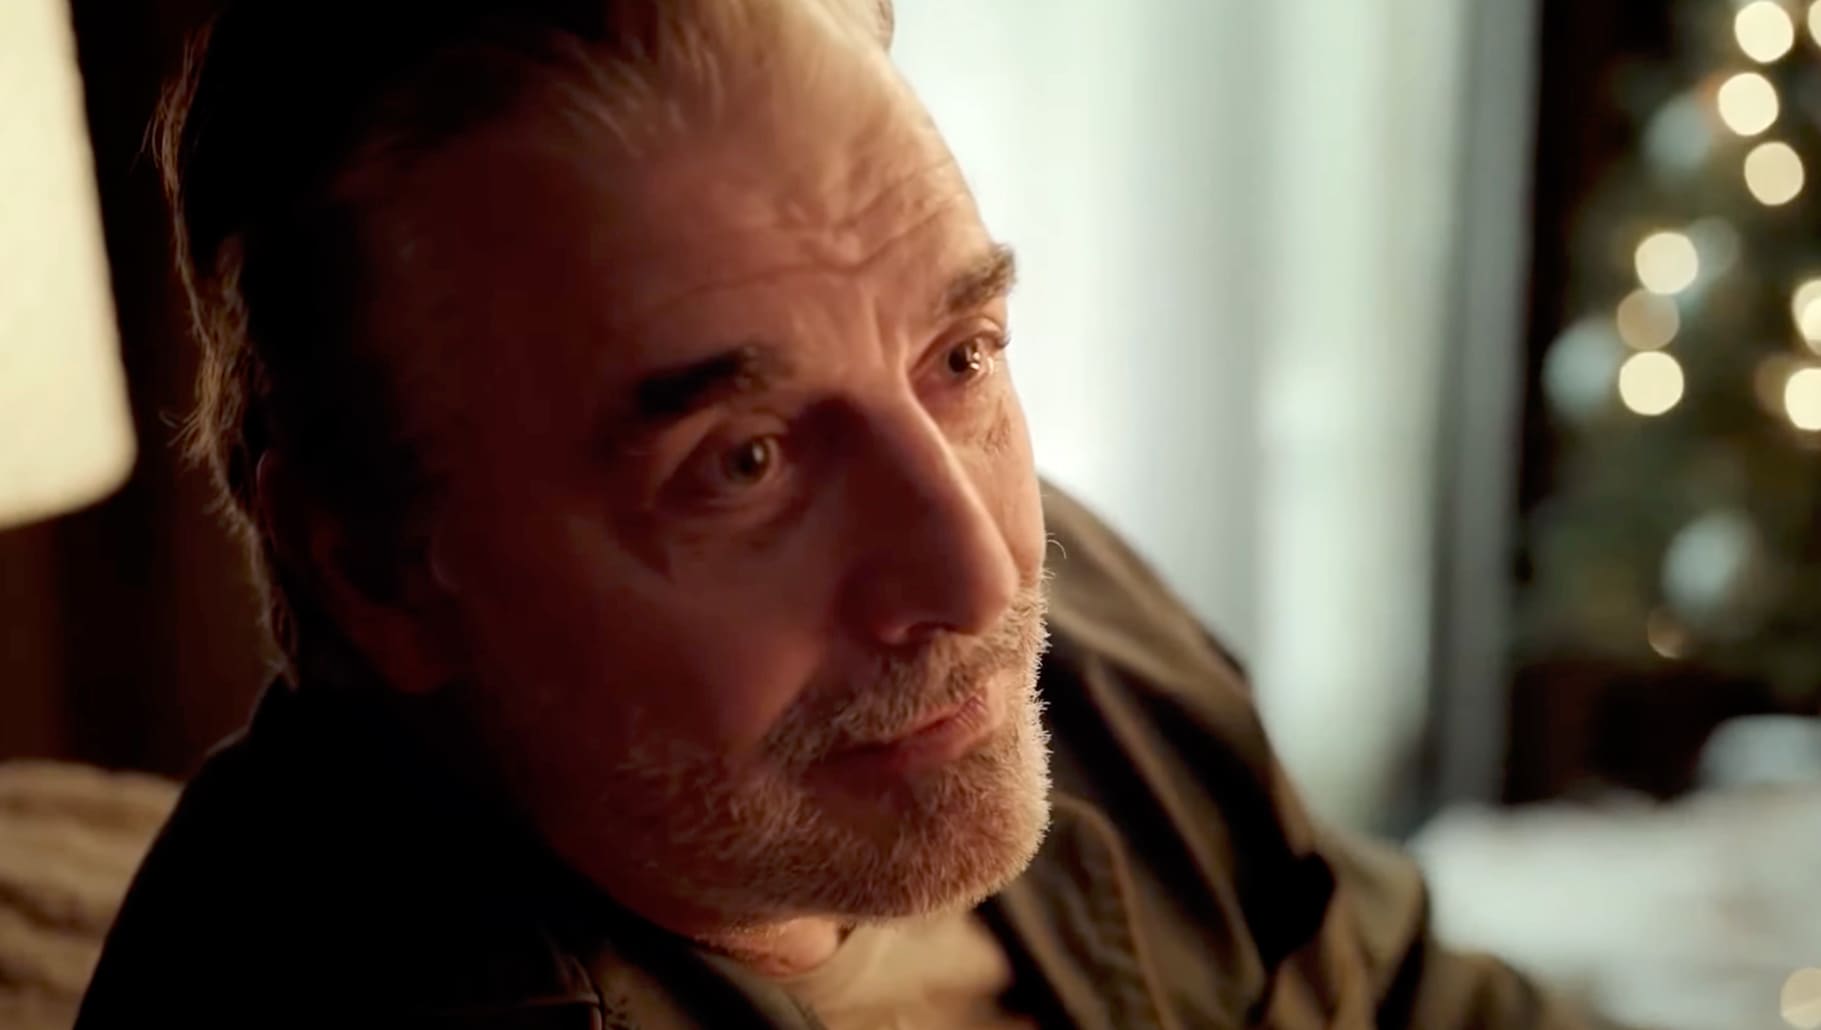 Peloton removes viral Chris Noth ad after sexual assault allegations